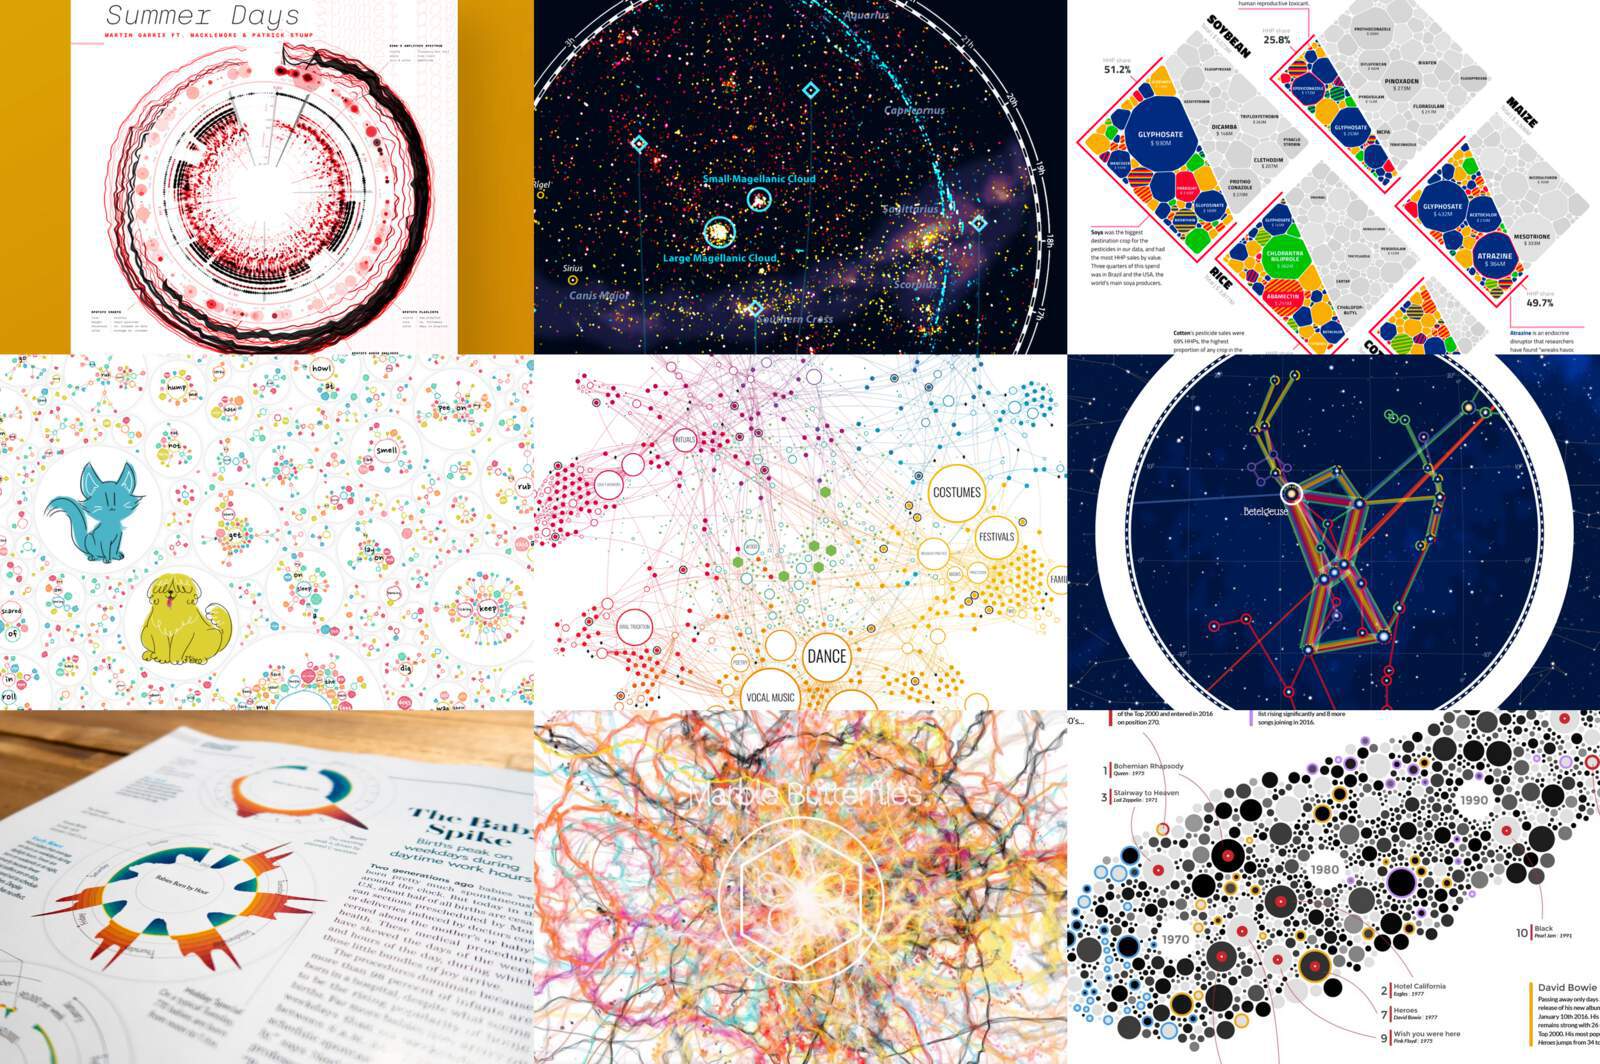 Some of my data visualization projects